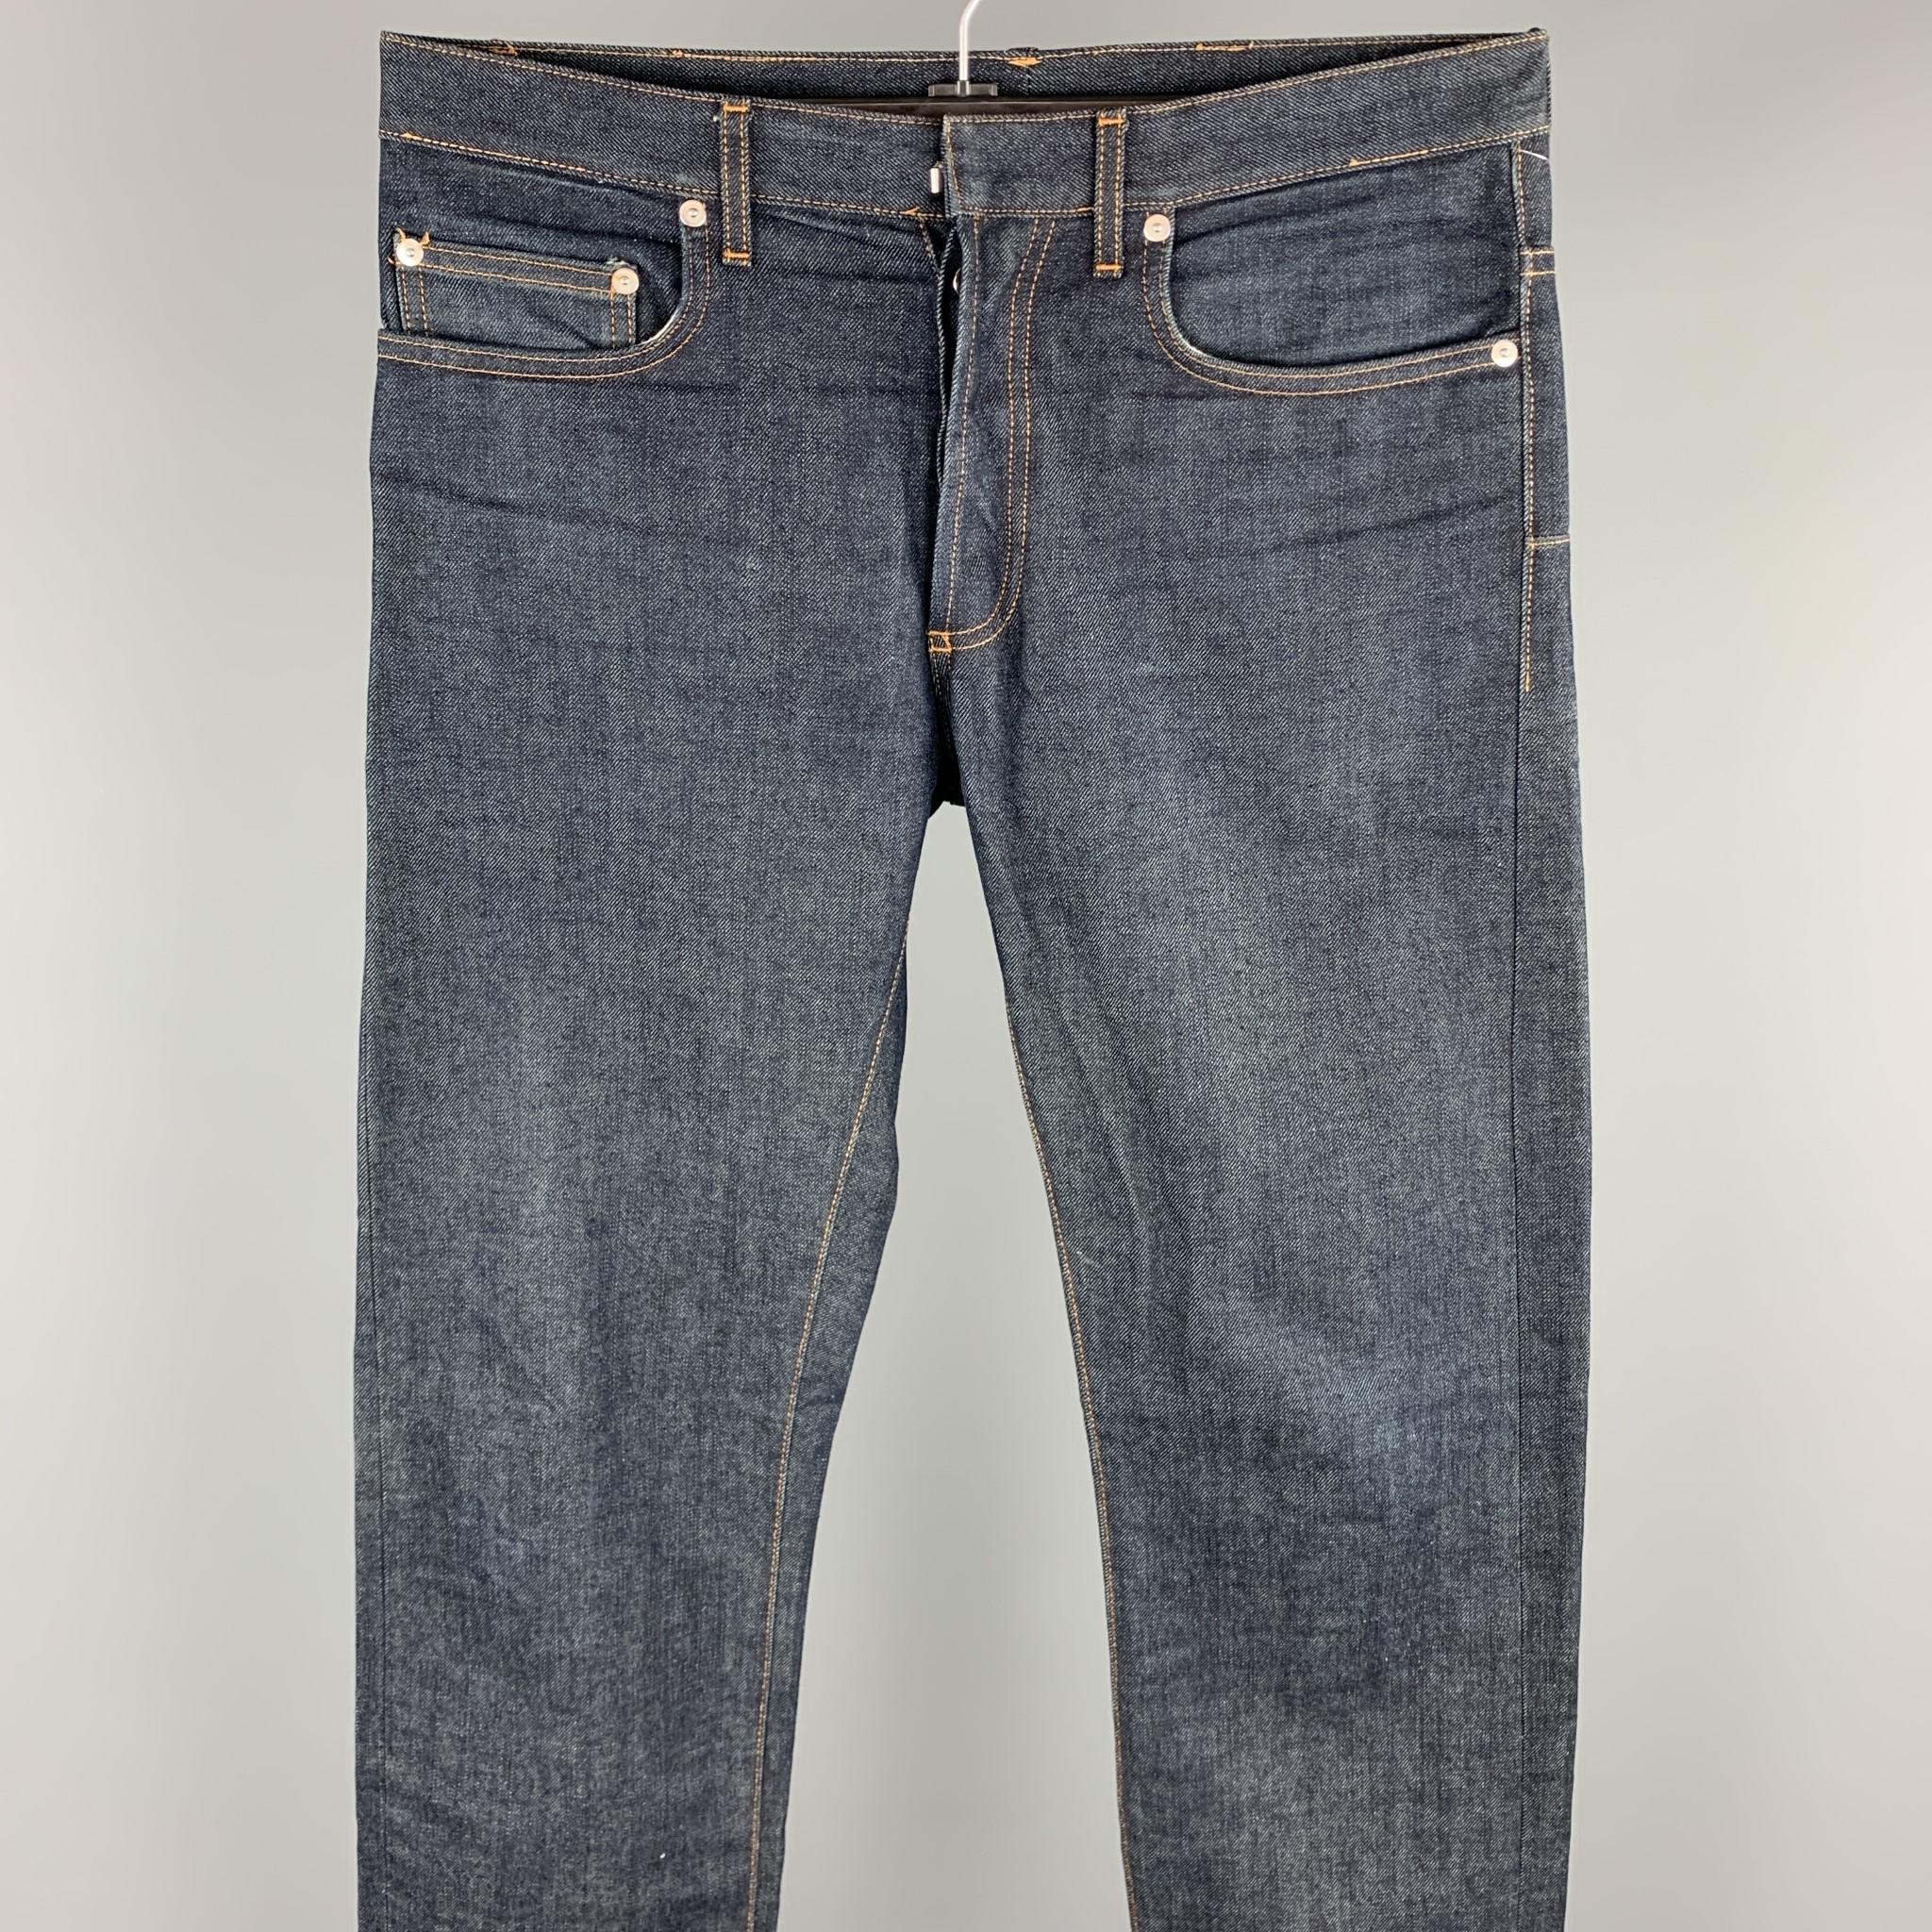 DIOR HOMME jeans comes in a indigo denim with contrast stitching featuring contrast stitching and a button fly closure. As-Is. Made in Italy.

Very Good Pre-Owned Condition.
Marked: 32

Measurements:

Waist: 34 in.
Rise: 9 in. 
Inseam: 32.5 in. 